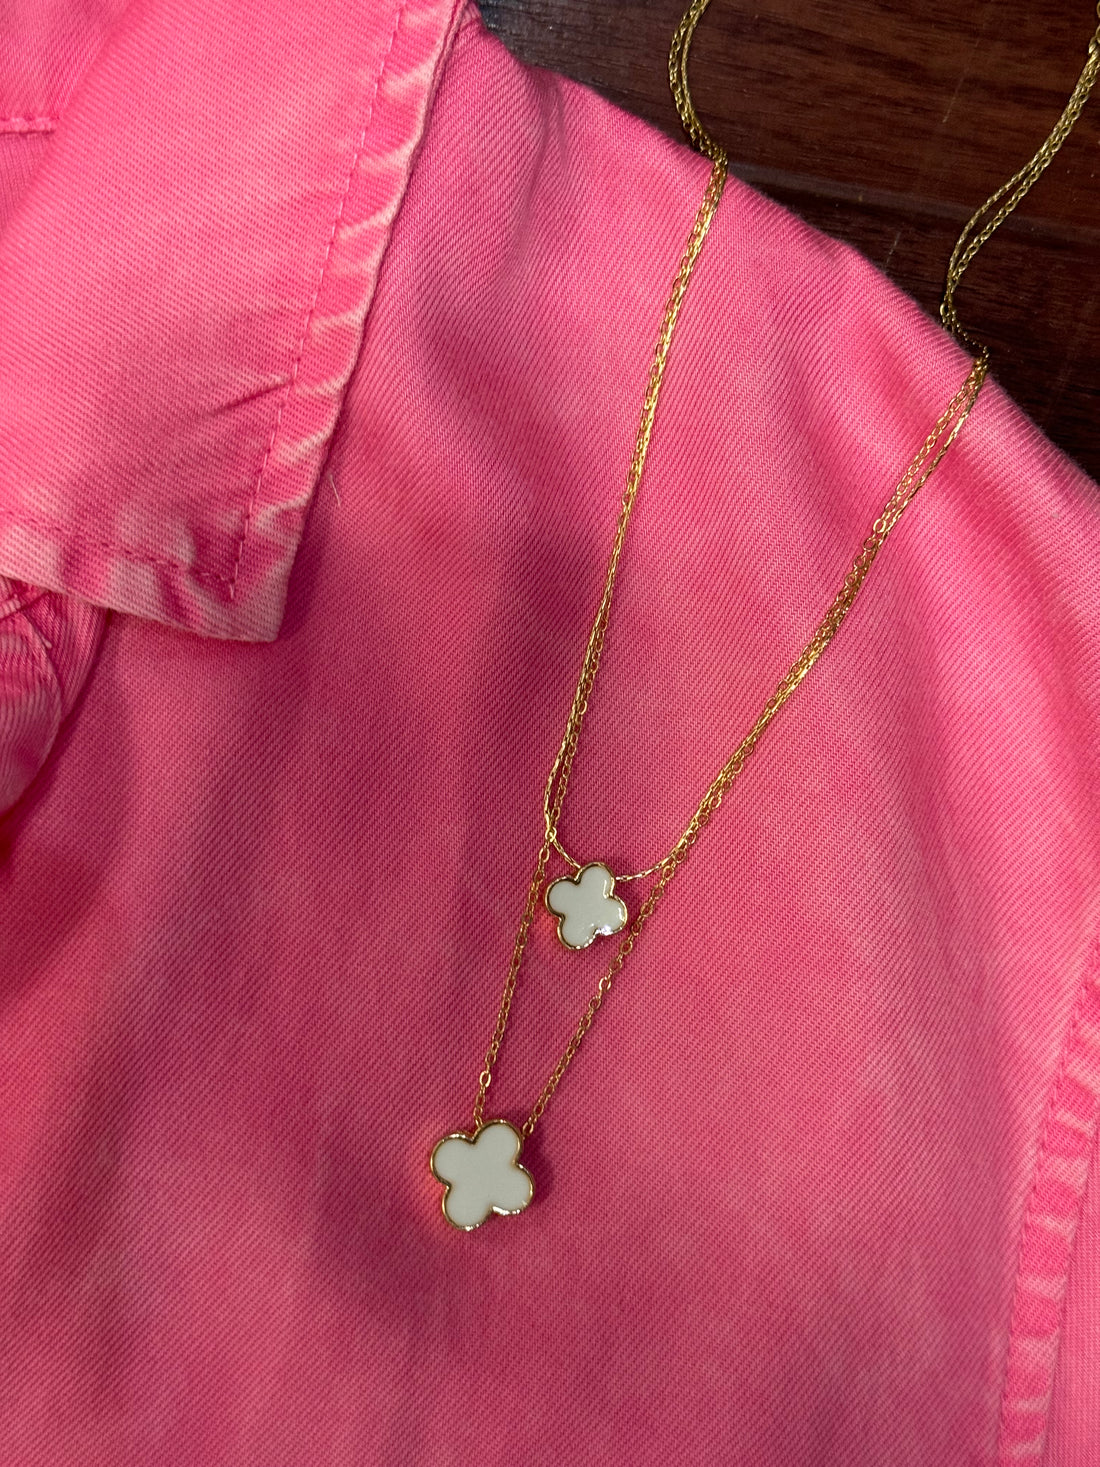 Two Layered White/Black Clover Necklace